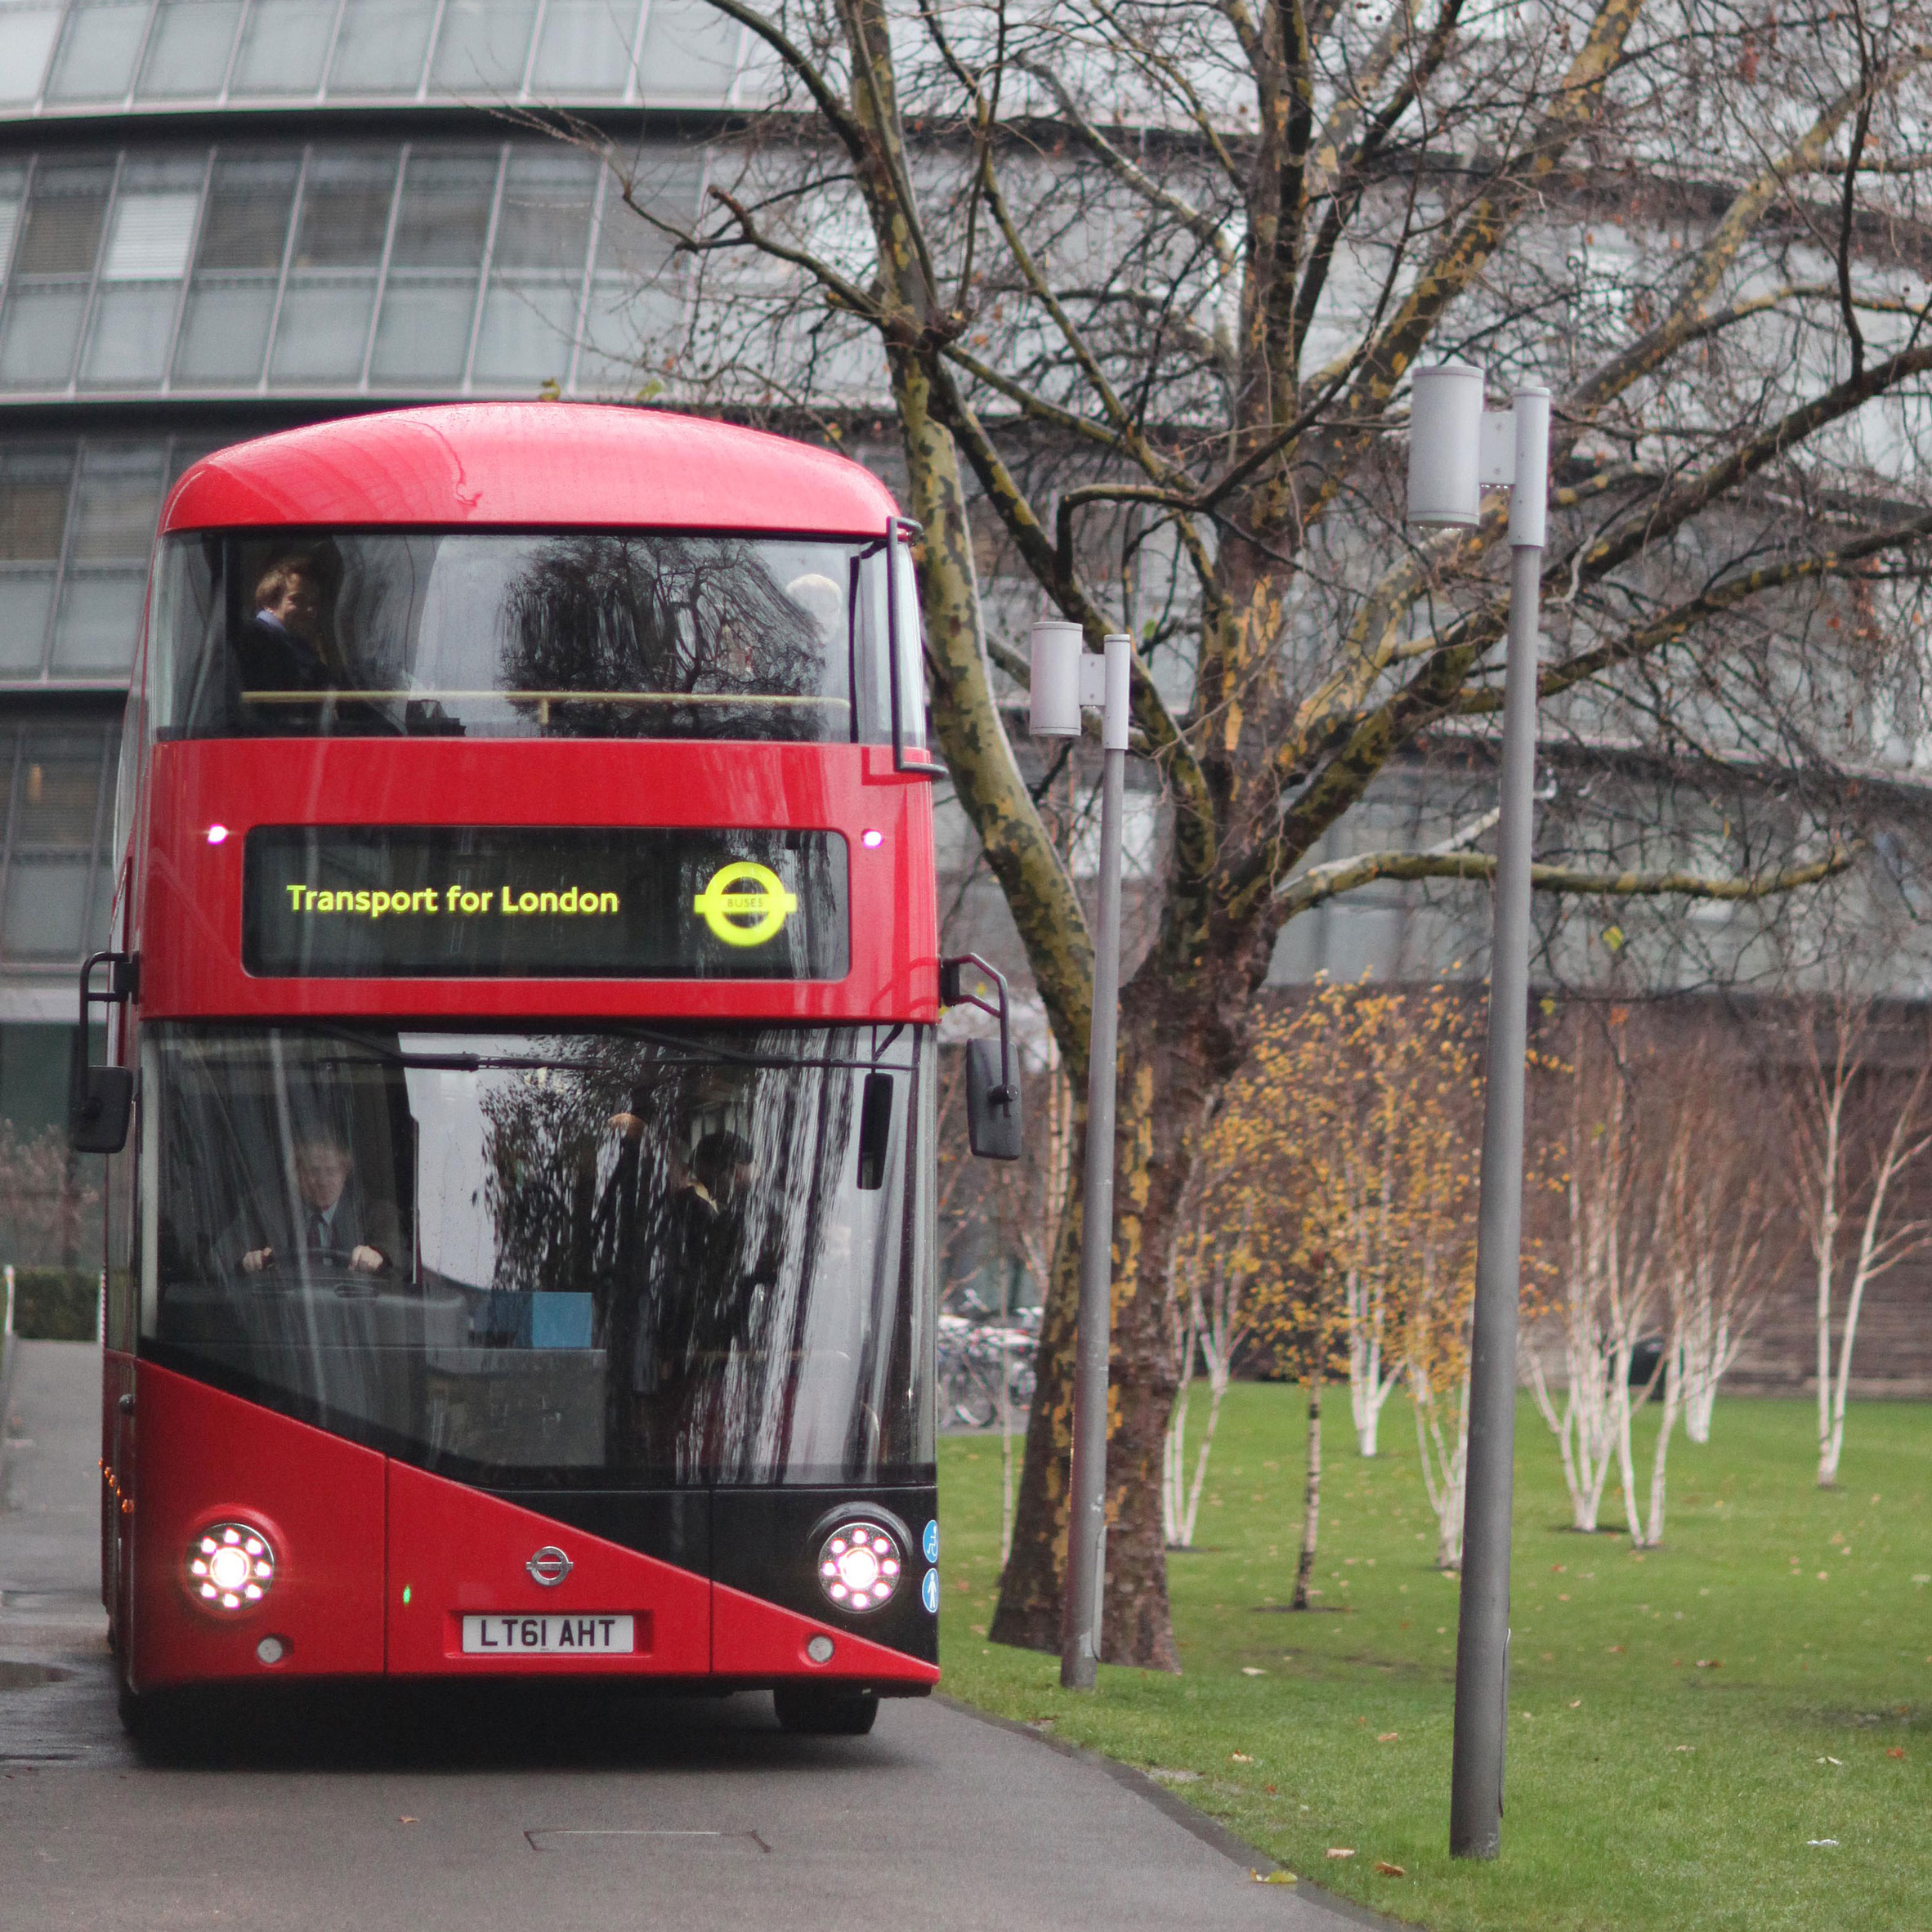 Case Study of London Buses Transport System